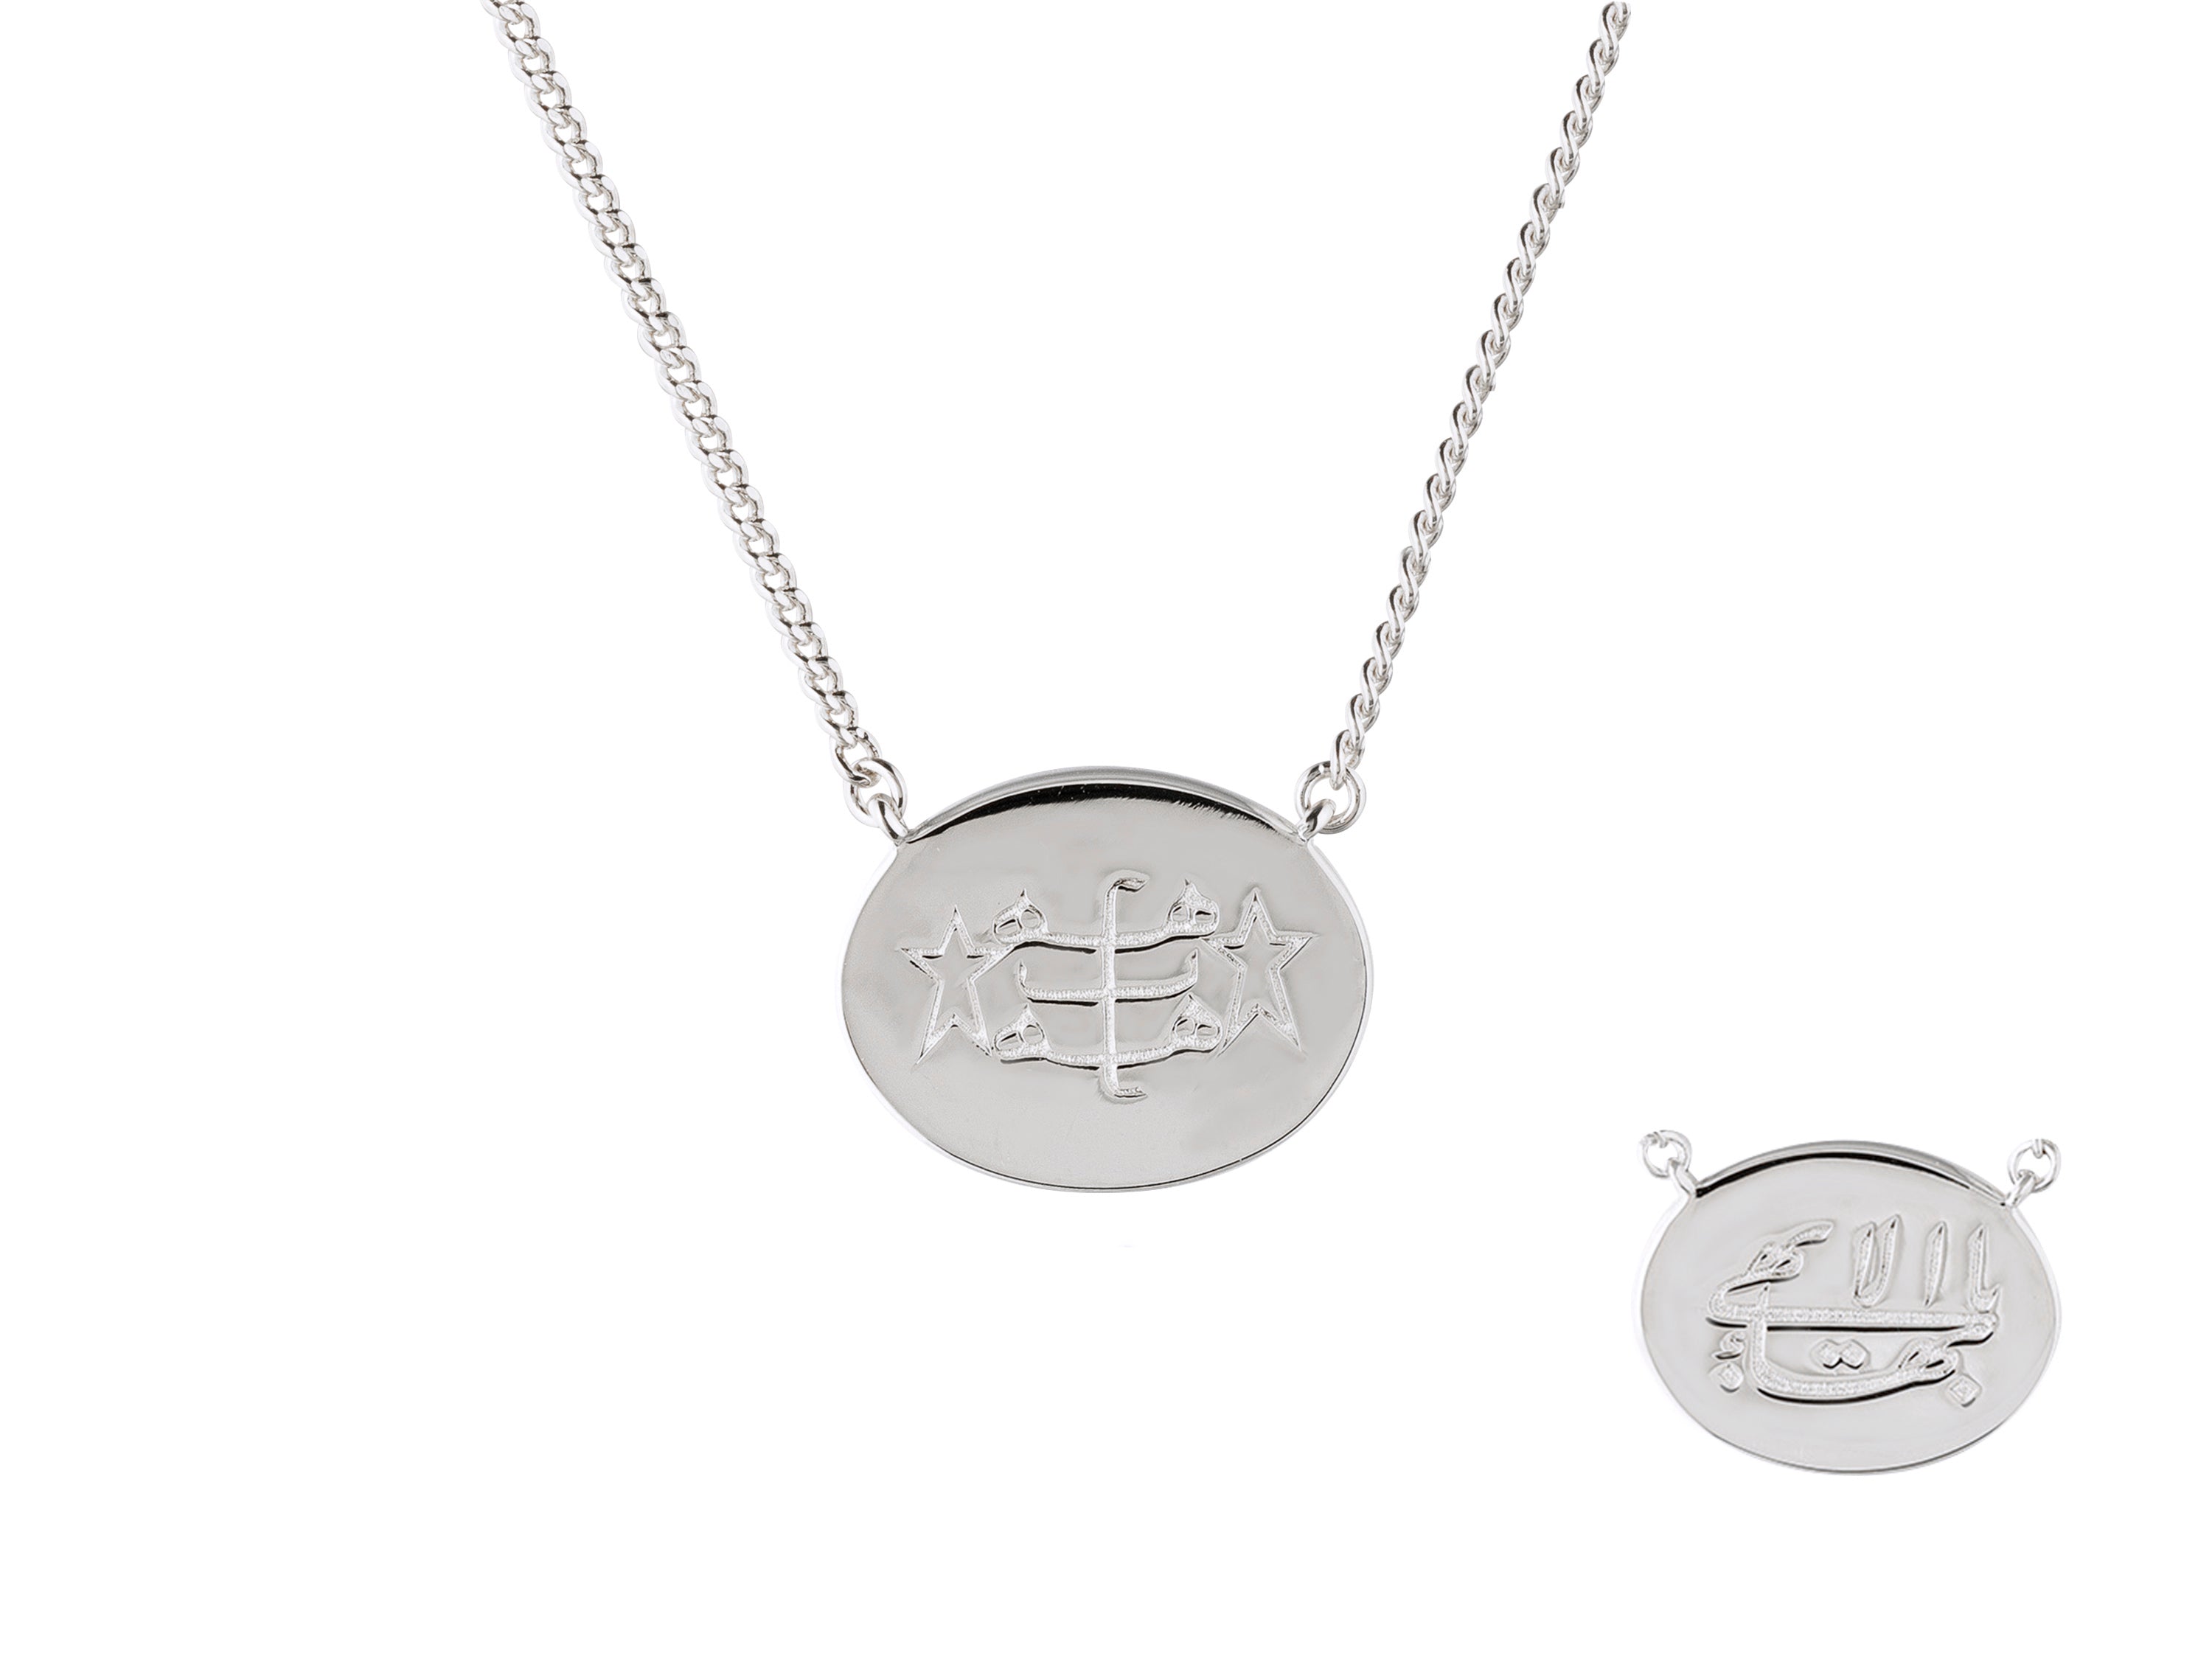 minimalist modern silver oval Bahai pendant necklace with Greatest Name in Arabic and ringstone symbol